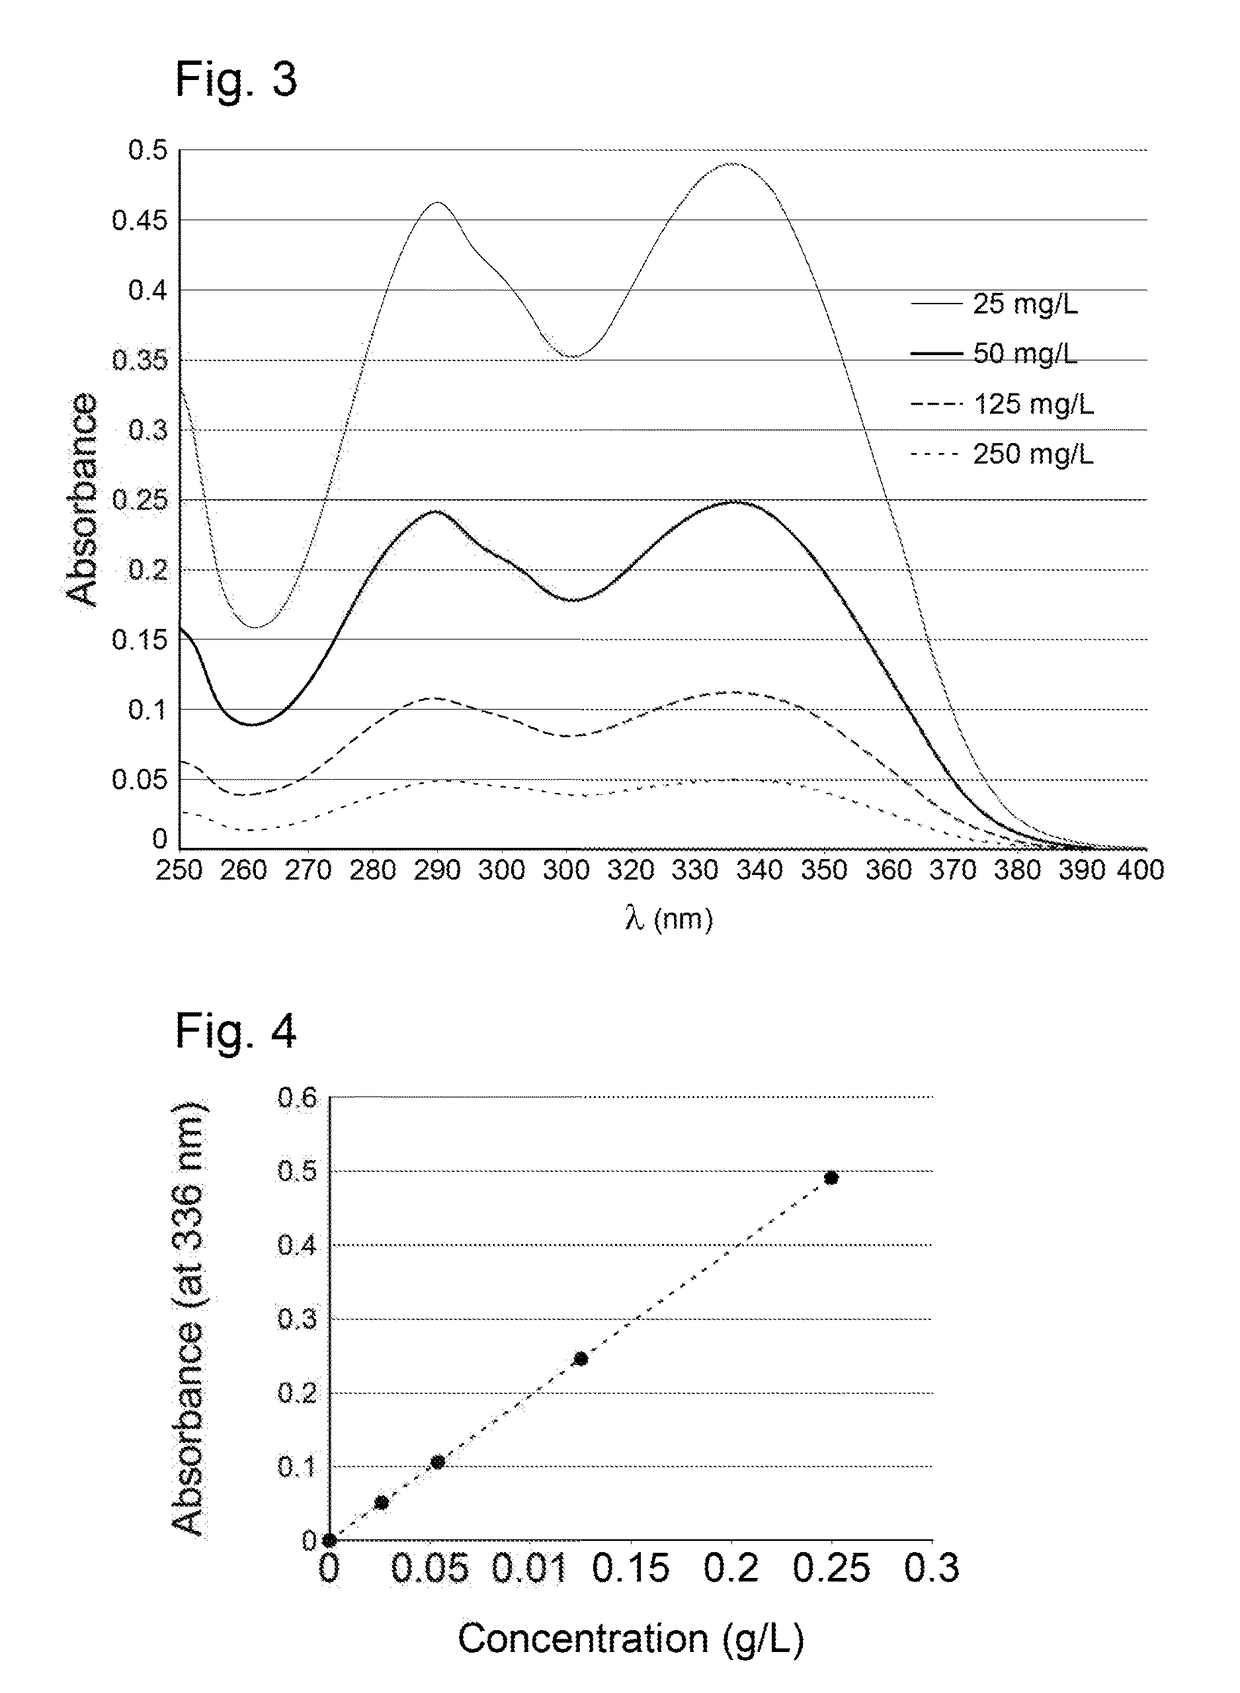 Substrate including a surface coated with an epilame agent and method for coating such a substrate with epilame